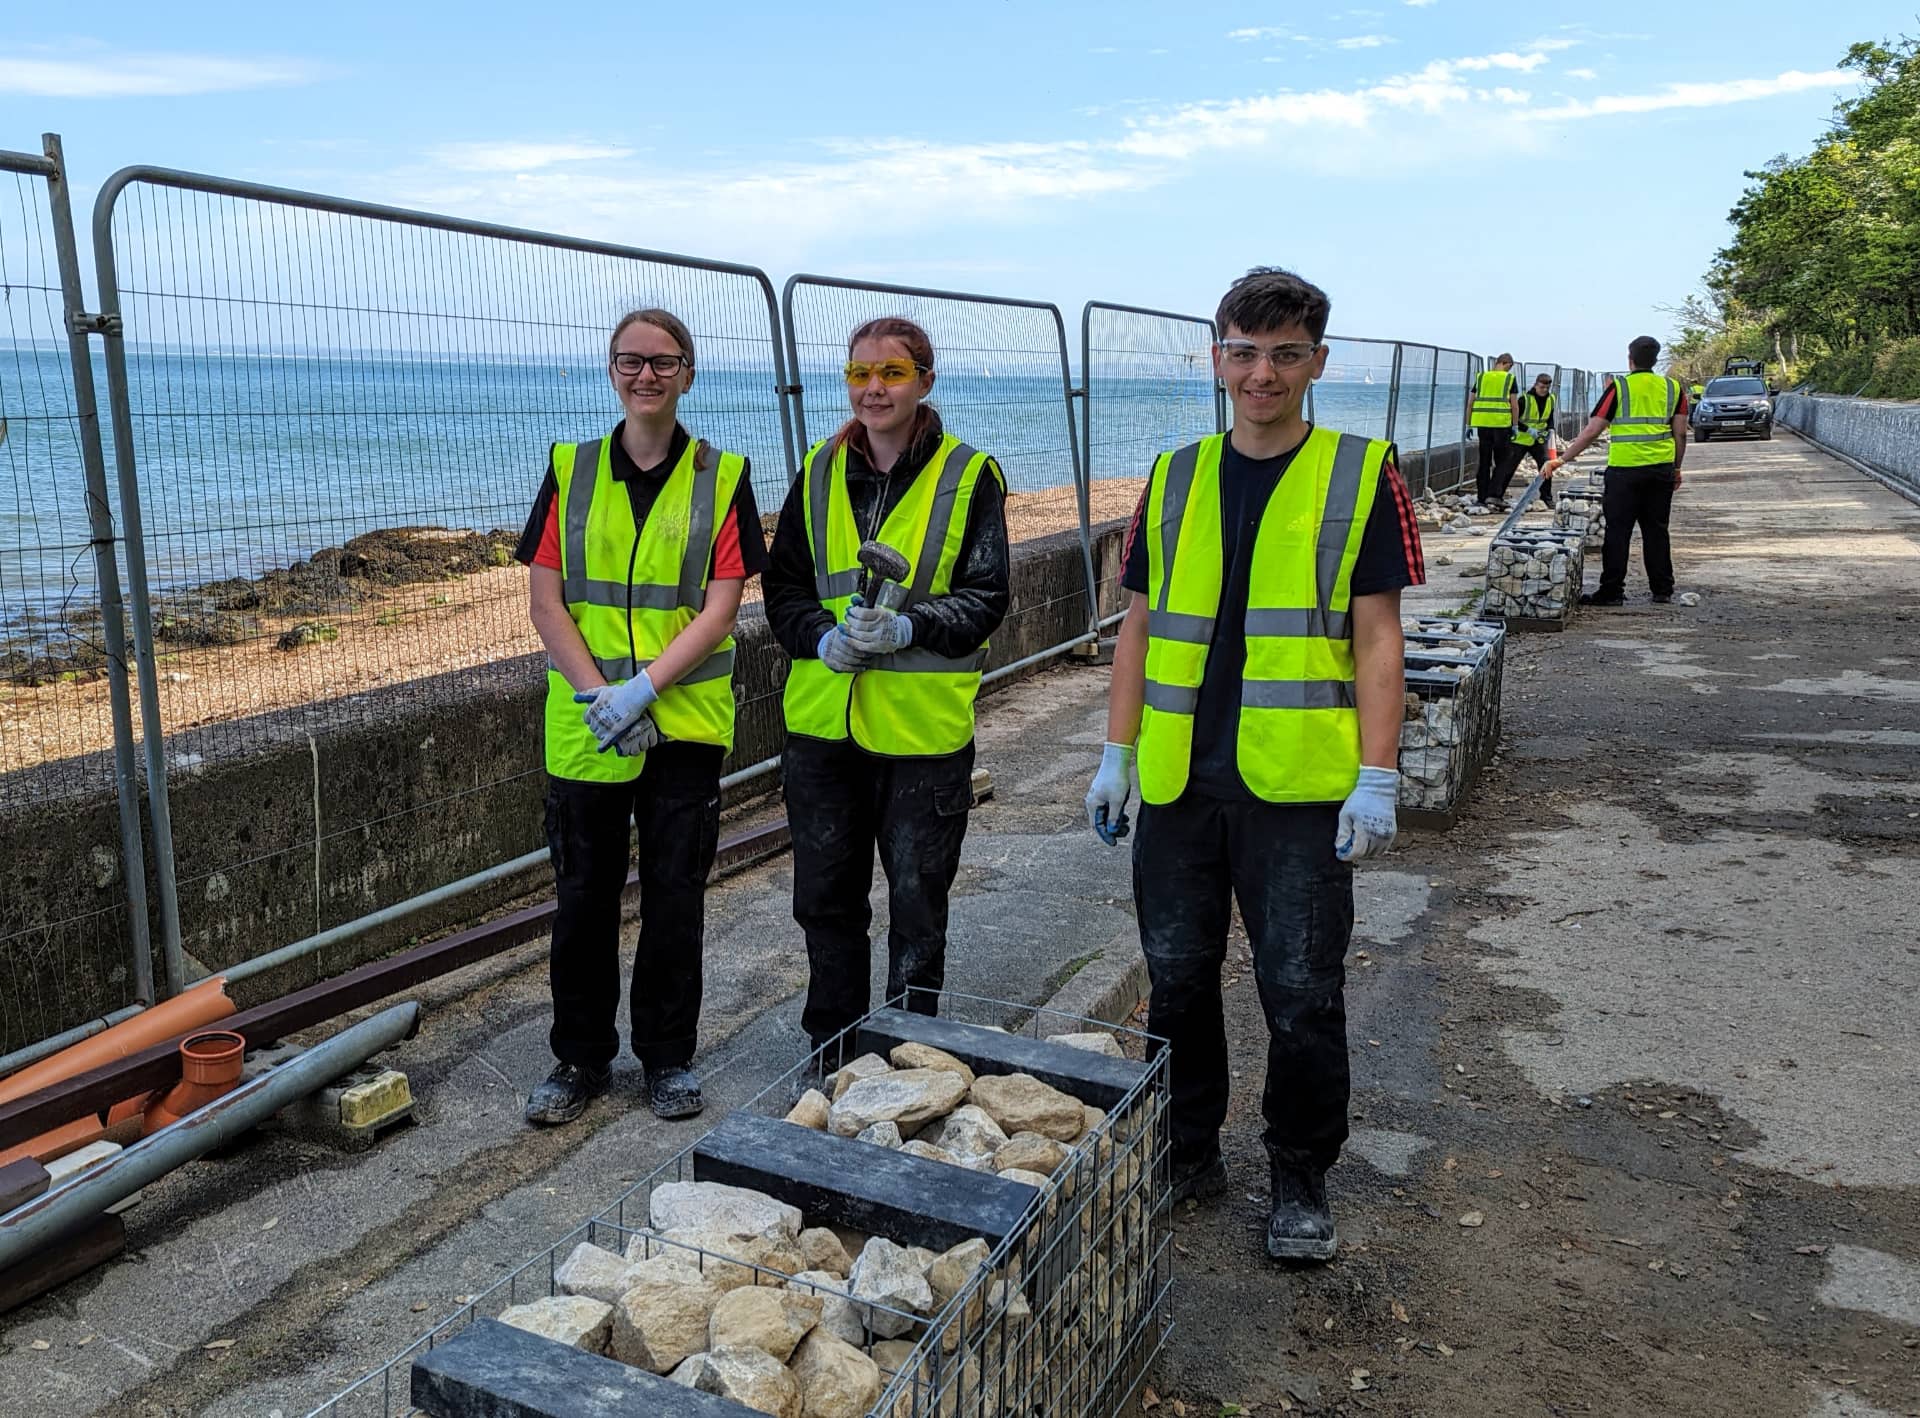 The students working with John Peck Construction on East Cowes Esplanade